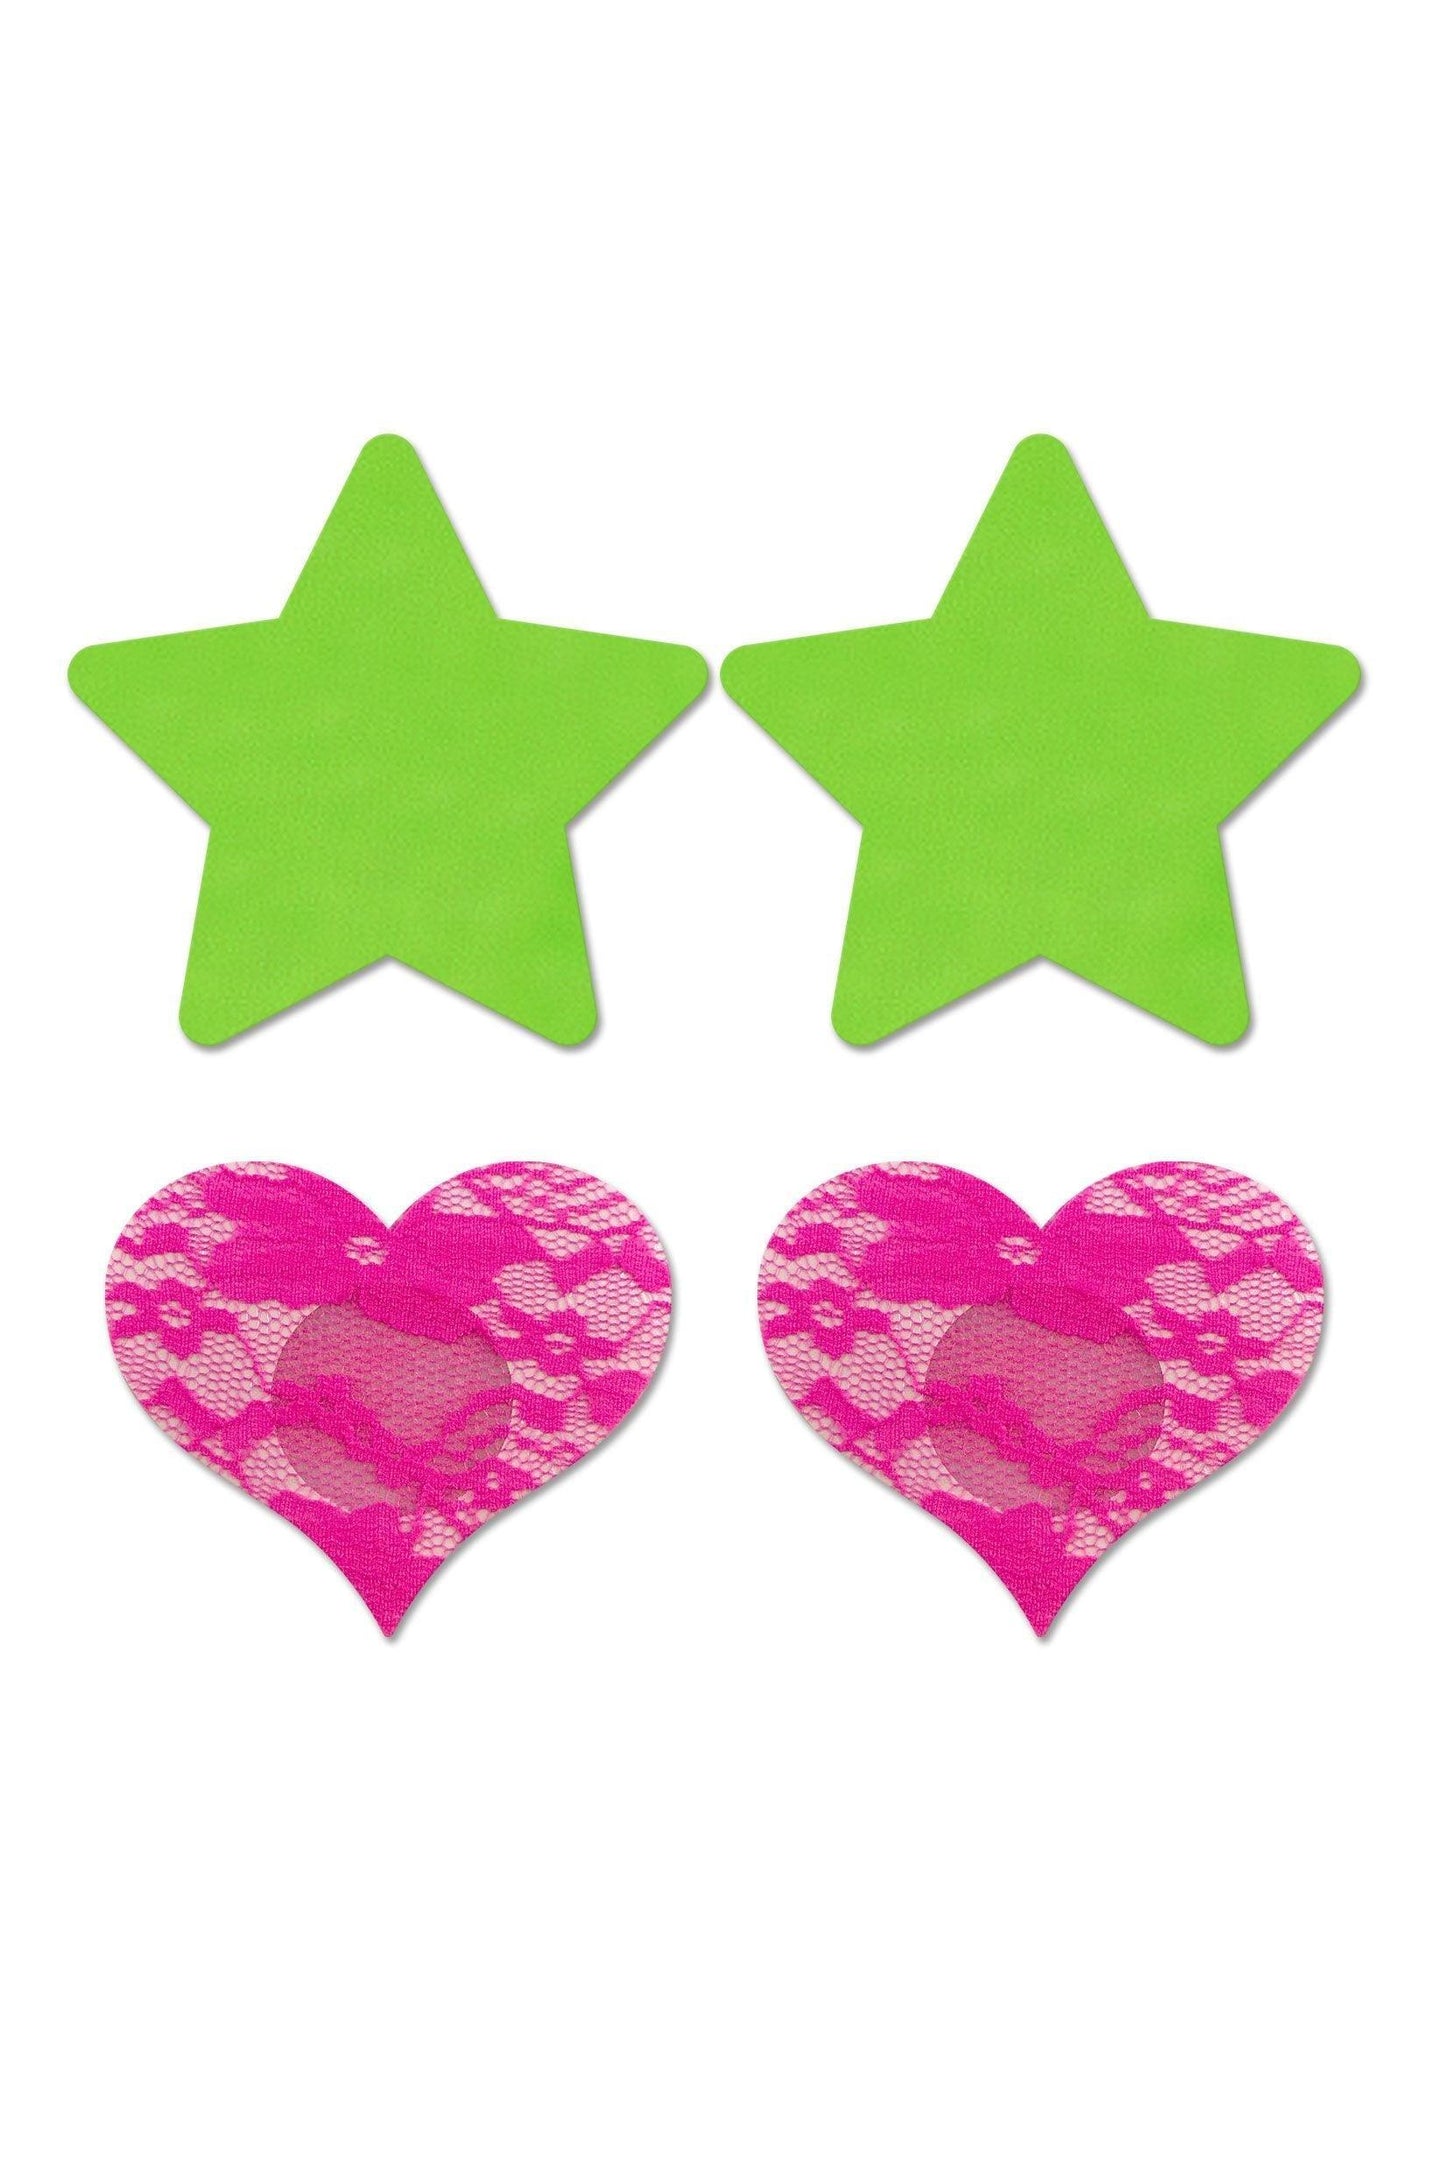 Fashion Pasties Set - Neon Green Solid Star and Neon Pink Lace Heart - My Sex Toy Hub